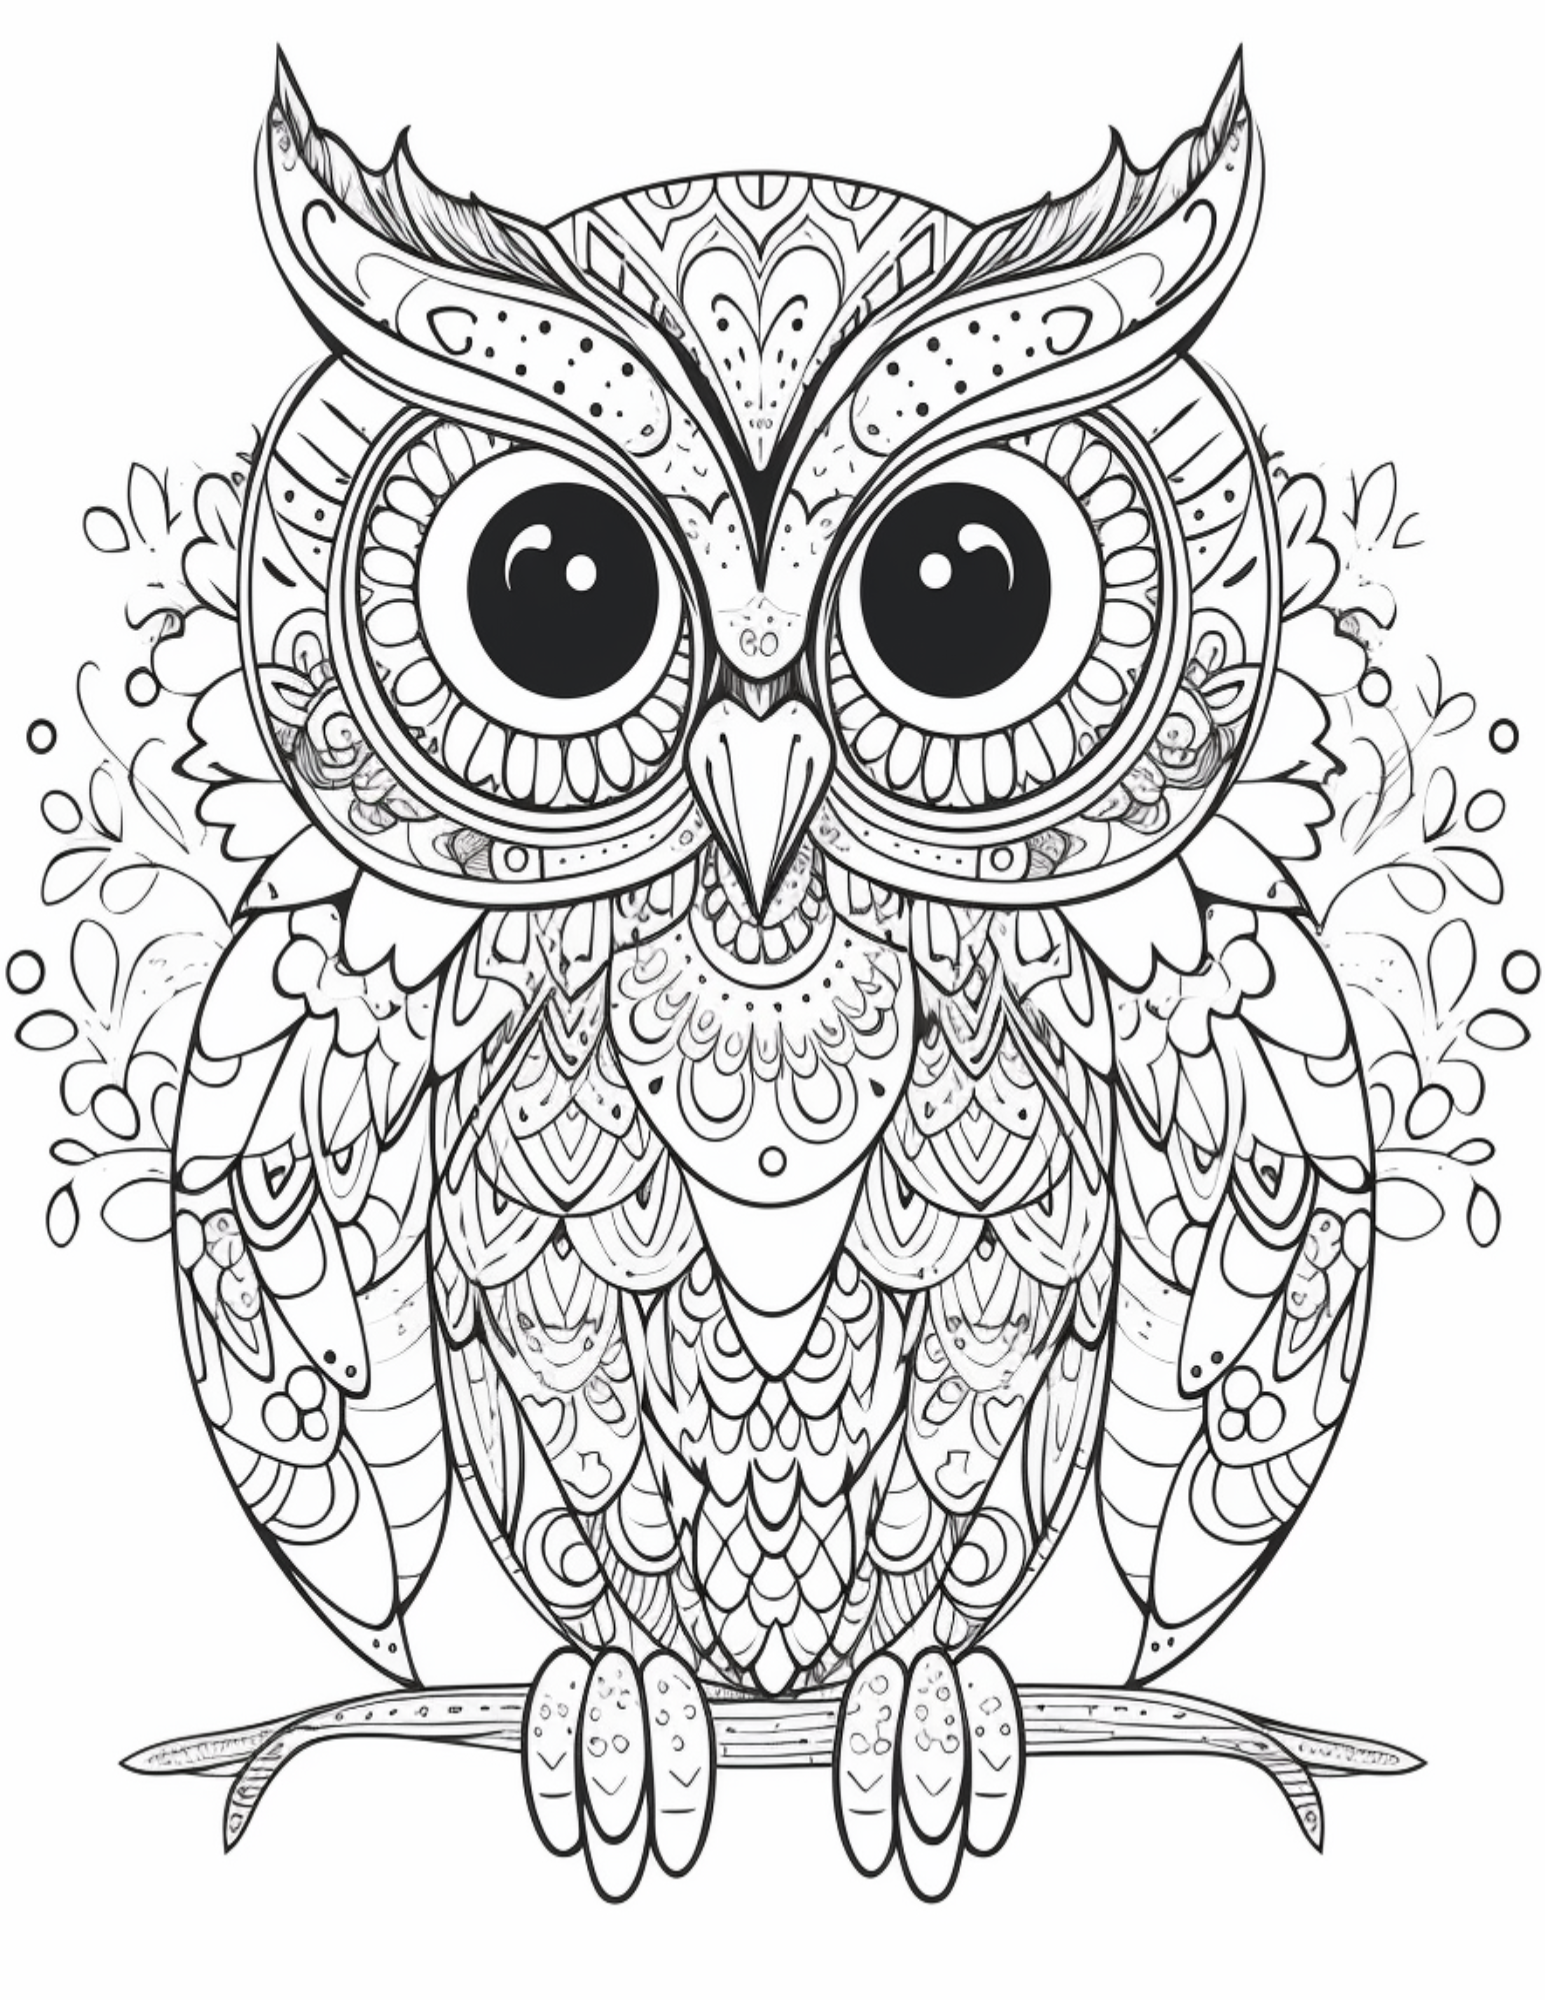 Printable digital owl coloring pages whimsyowls coloring collection